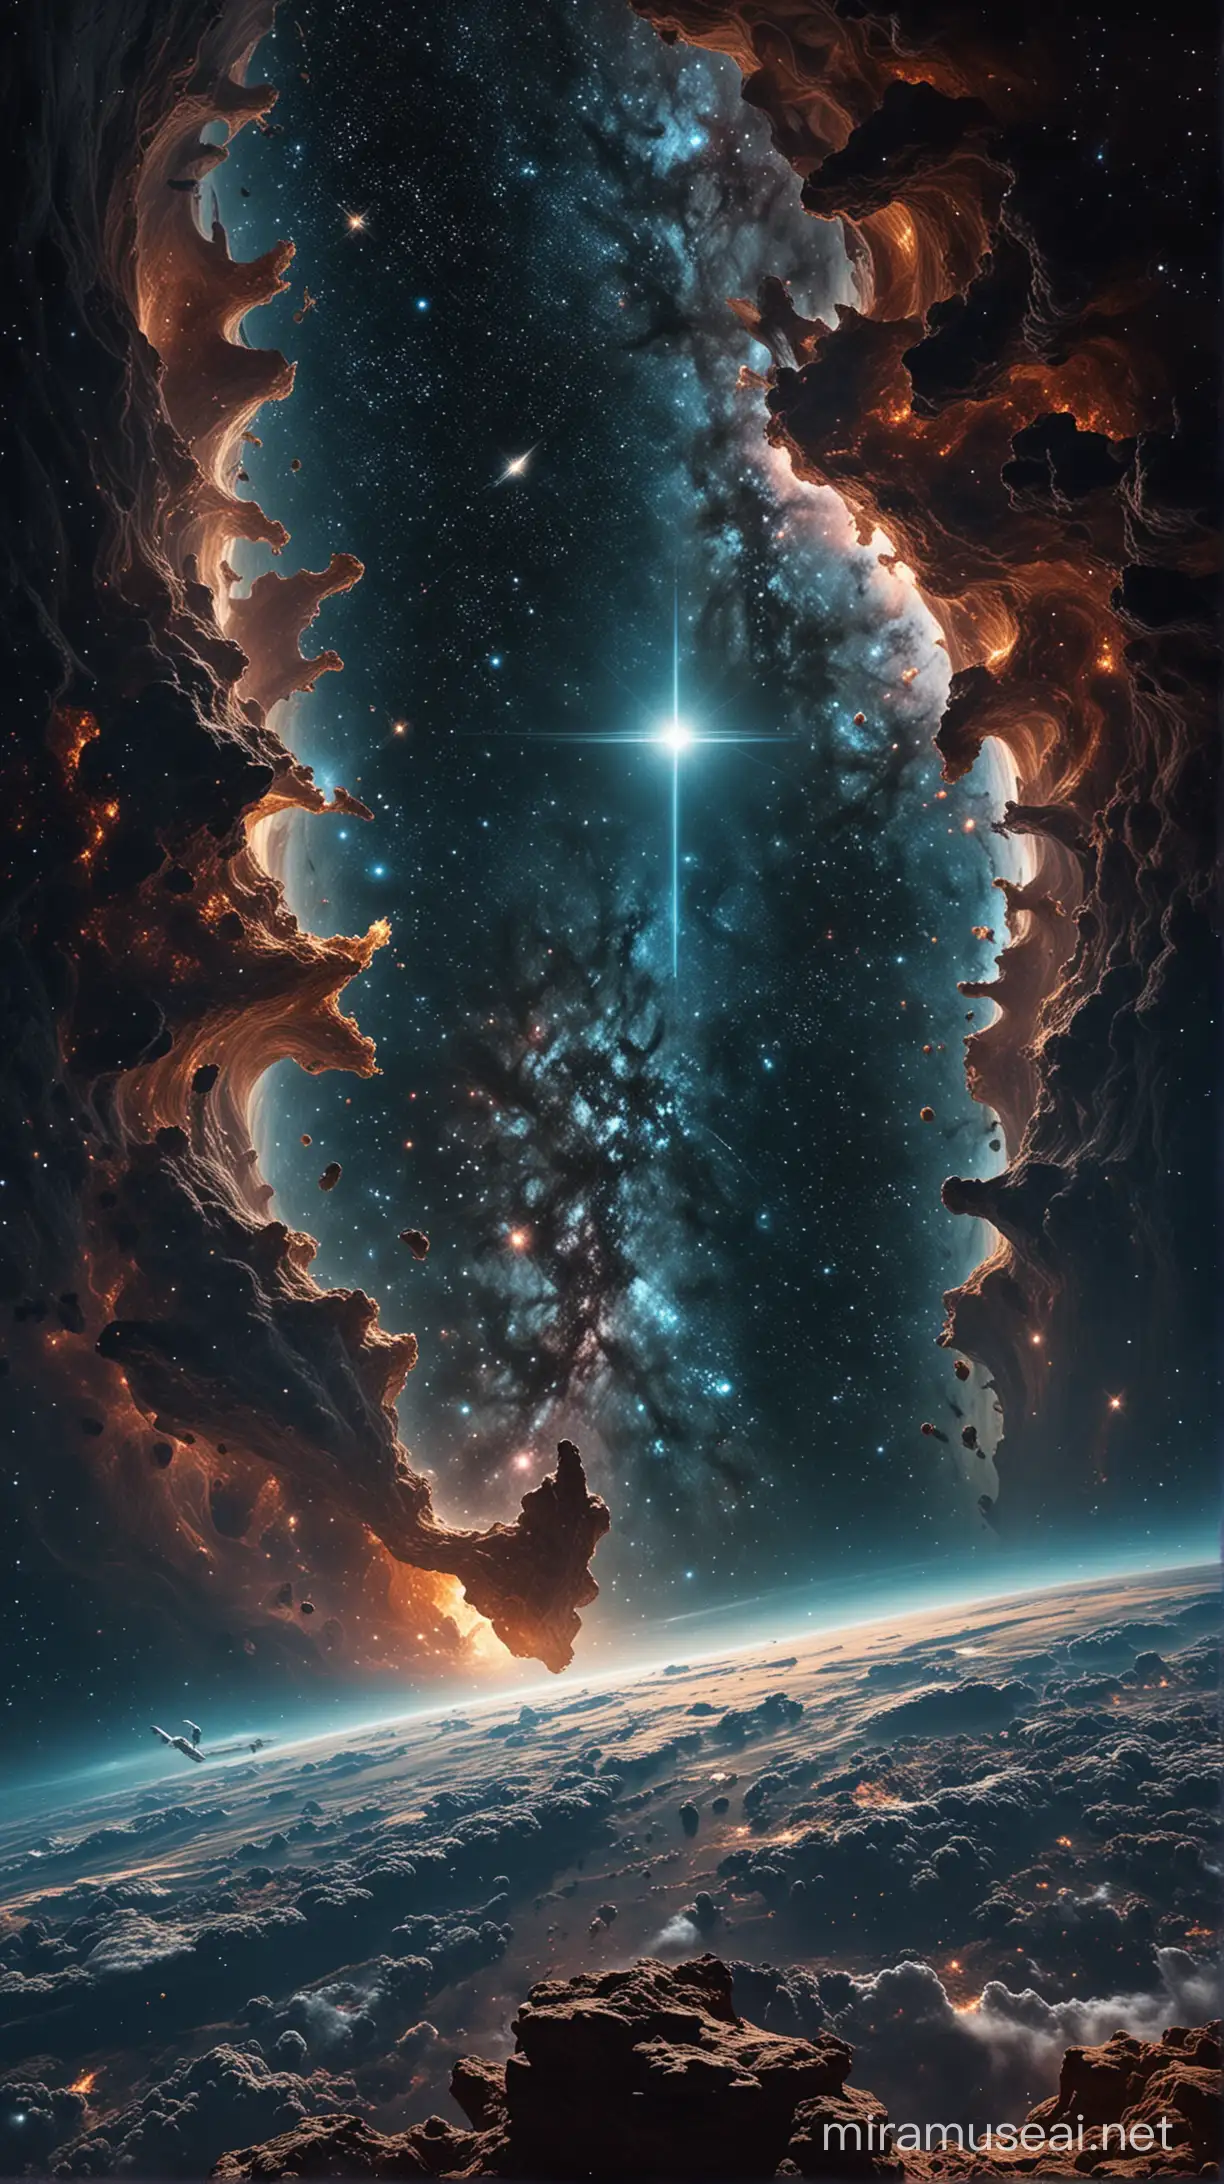 Create an otherworldly and awe-inspiring scene set in a distant corner of the universe. Show a vast expanse of space stretching endlessly into the distance, punctuated by distant stars, nebulae, and galaxies swirling in cosmic dance. Include celestial bodies of varying sizes and shapes, each emitting its own unique glow and energy. Depict surreal landscapes and fantastical structures floating amidst the void, defying the laws of physics and imagination. Capture the sense of wonder and exploration as spacecraft glide gracefully through the cosmic tapestry, their sleek forms blending seamlessly with the ethereal backdrop. Ensure that the scene evokes a sense of mystery, grandeur, and infinite possibility, inviting viewers to contemplate the wonders of the cosmos and their place within it."